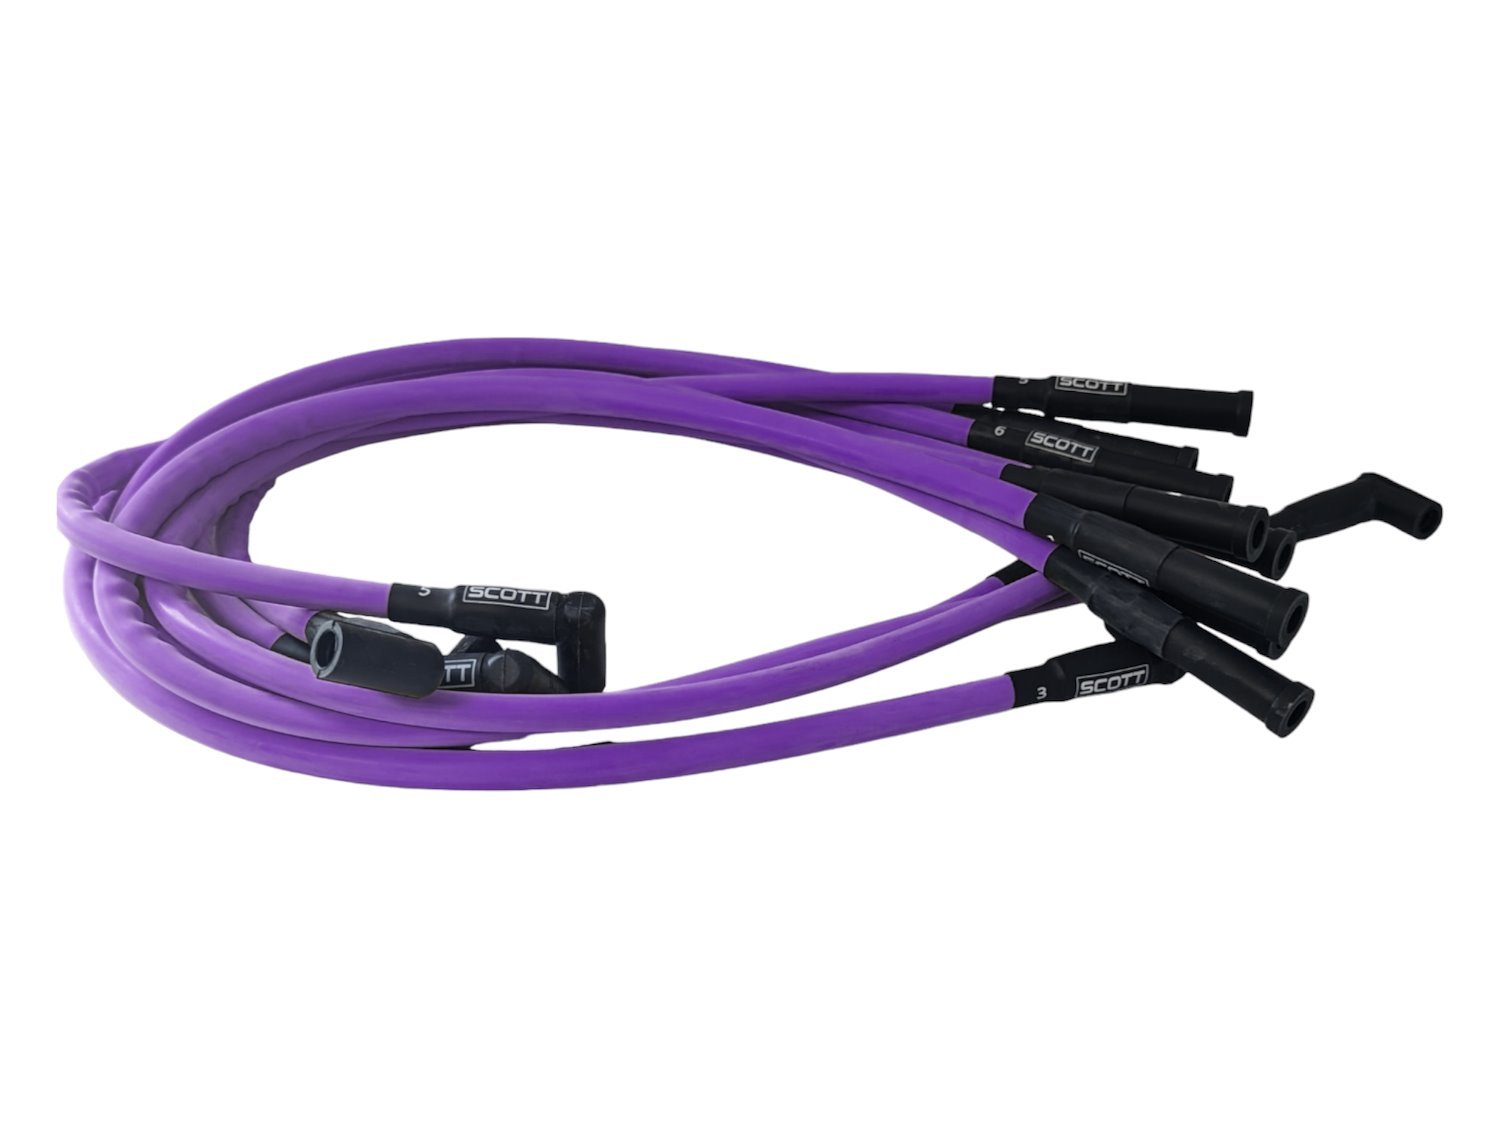 SPW-CH-660-6 High-Performance Silicone-Sleeved Spark Plug Wire Set for Small Block Dodge, Over Valve Cover [Purple]